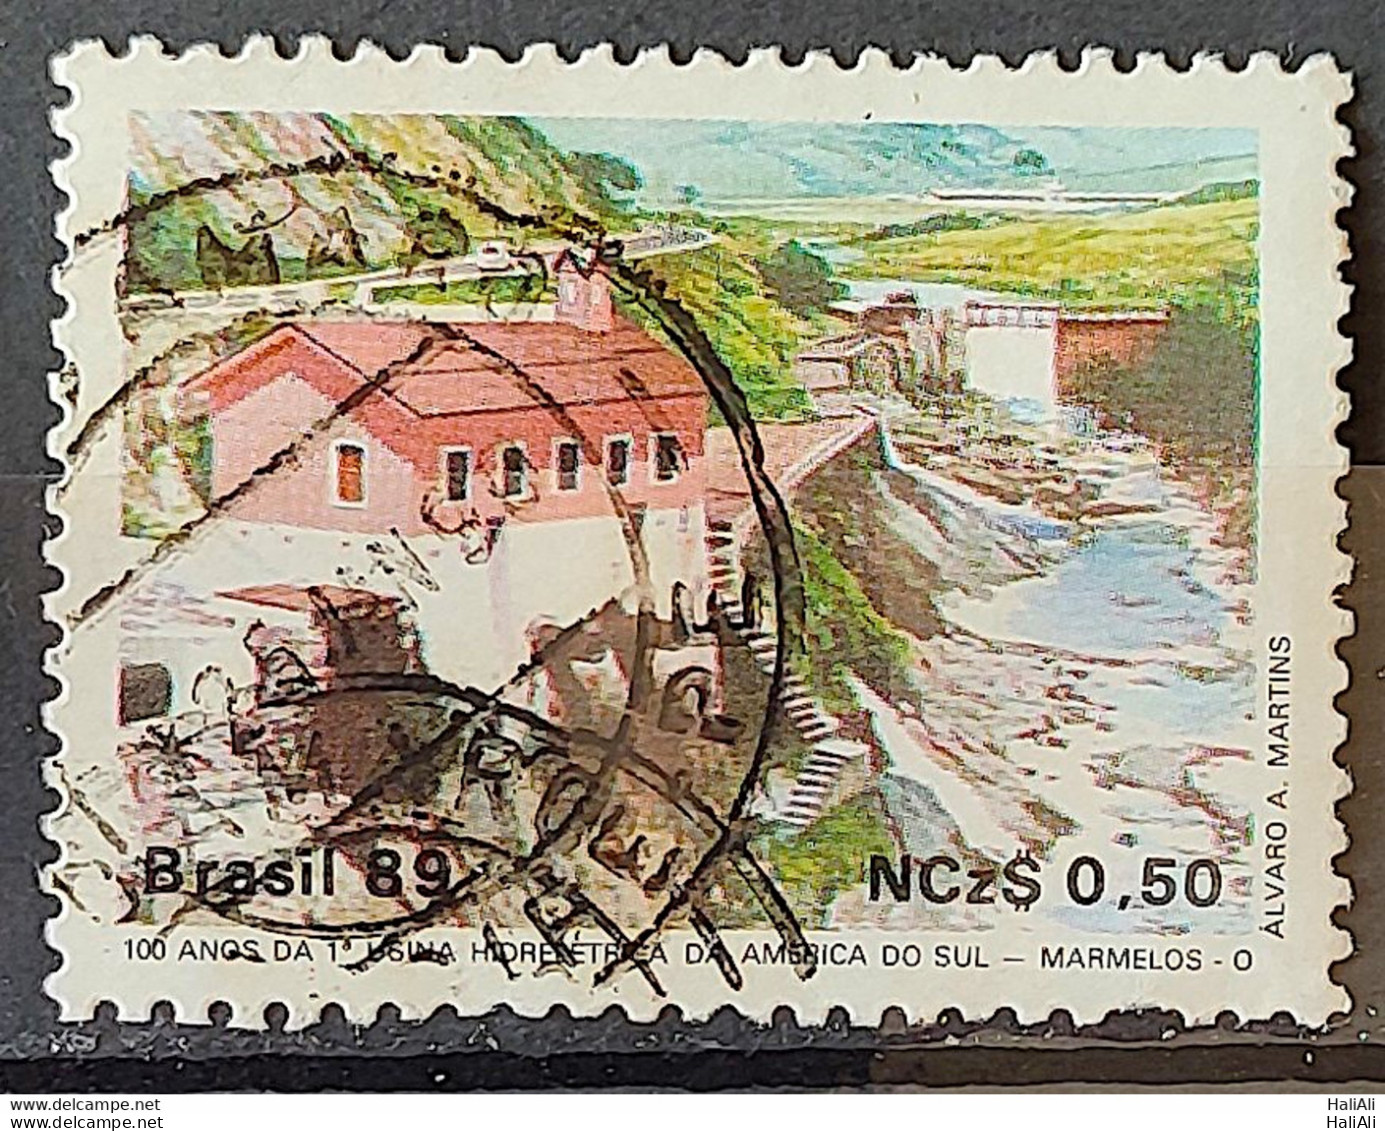 C 1644 Brazil Stamp 100 Years Hydroelectric Marmelos Energy Electricity Juiz De Fora 1989 Circulated 18 - Usados